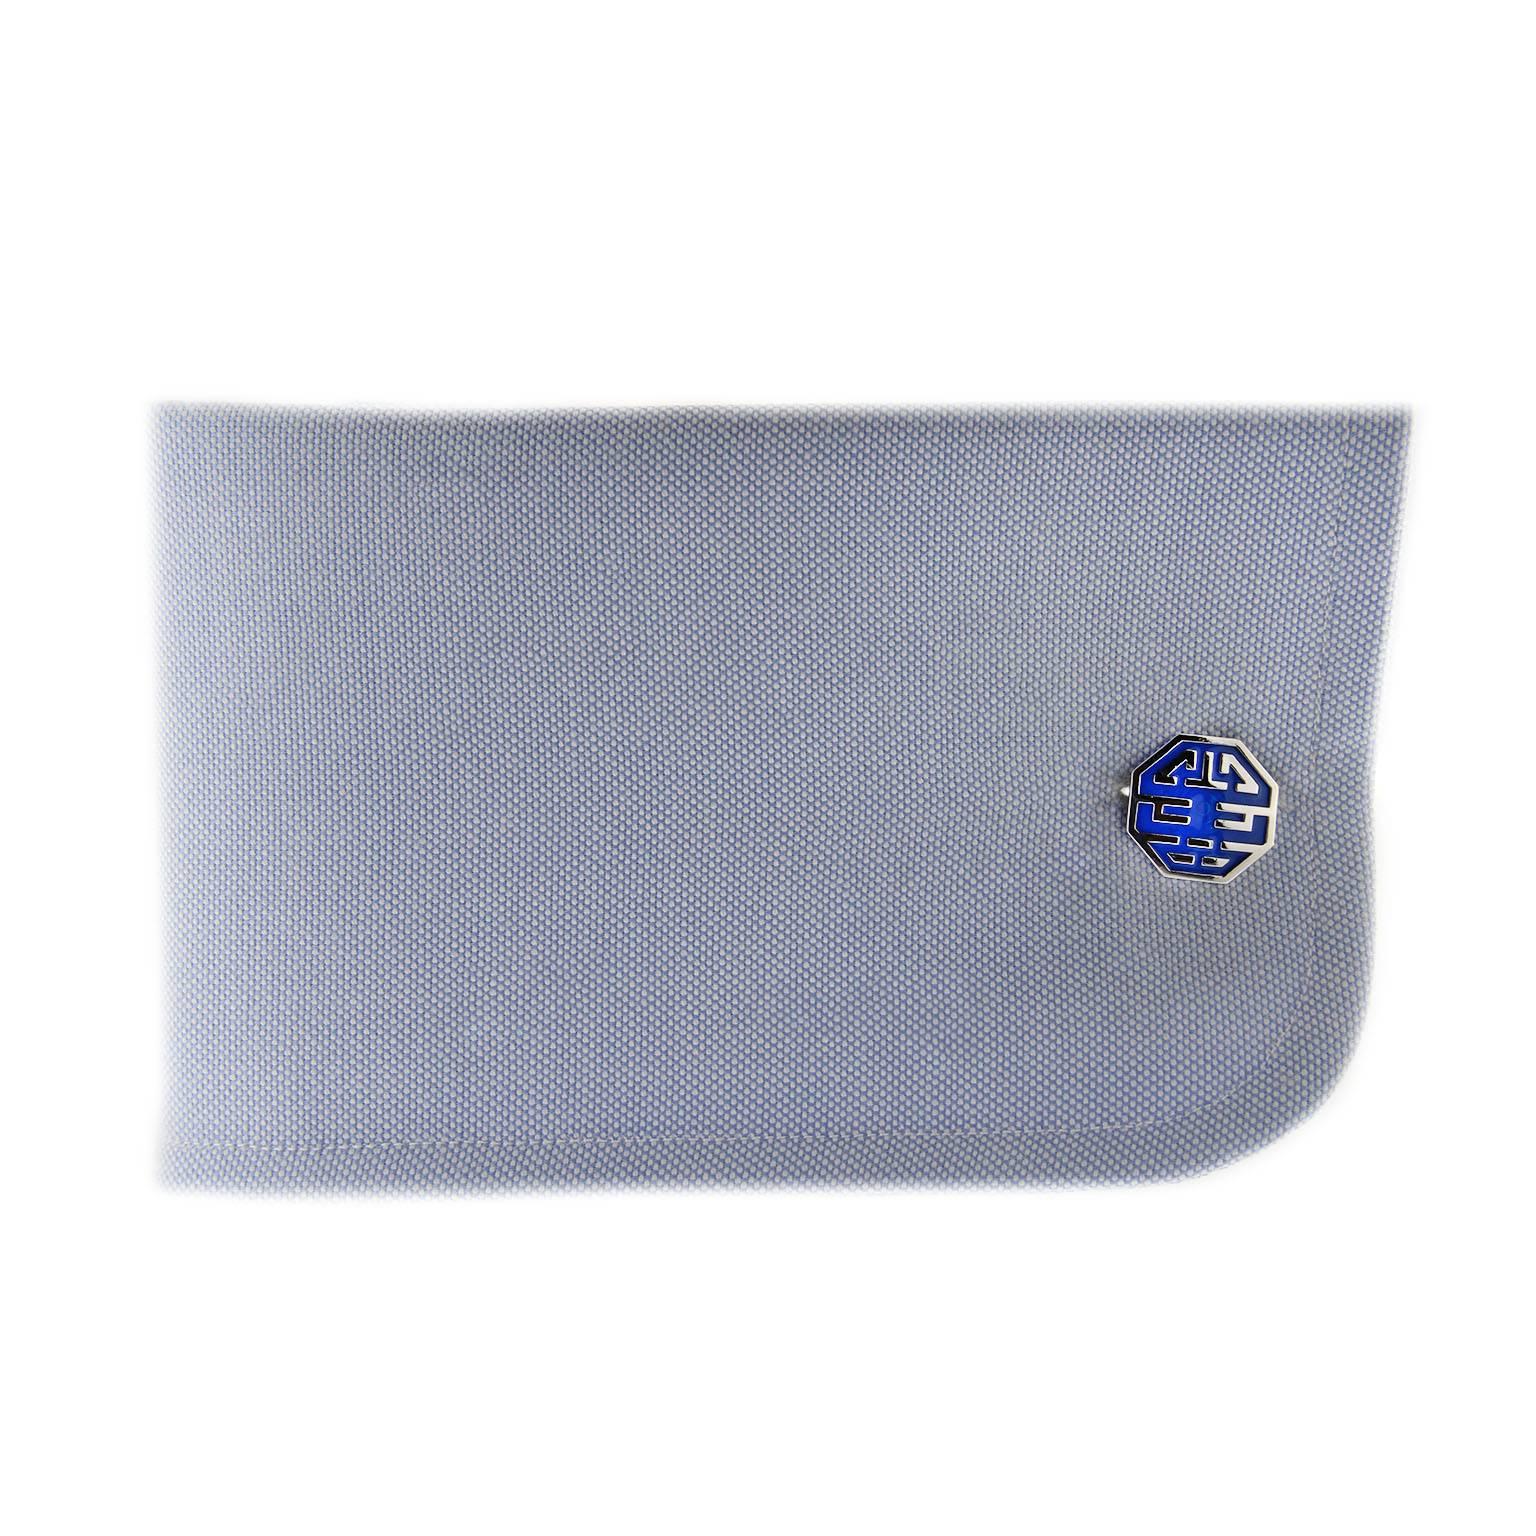 Jona design collection “Long & happy Life”, hand crafted in Italy, sterling silver cufflinks with blue enamel . Chinese luck bringer symbol since the time of emperors. Dimensions: Large button 0.56